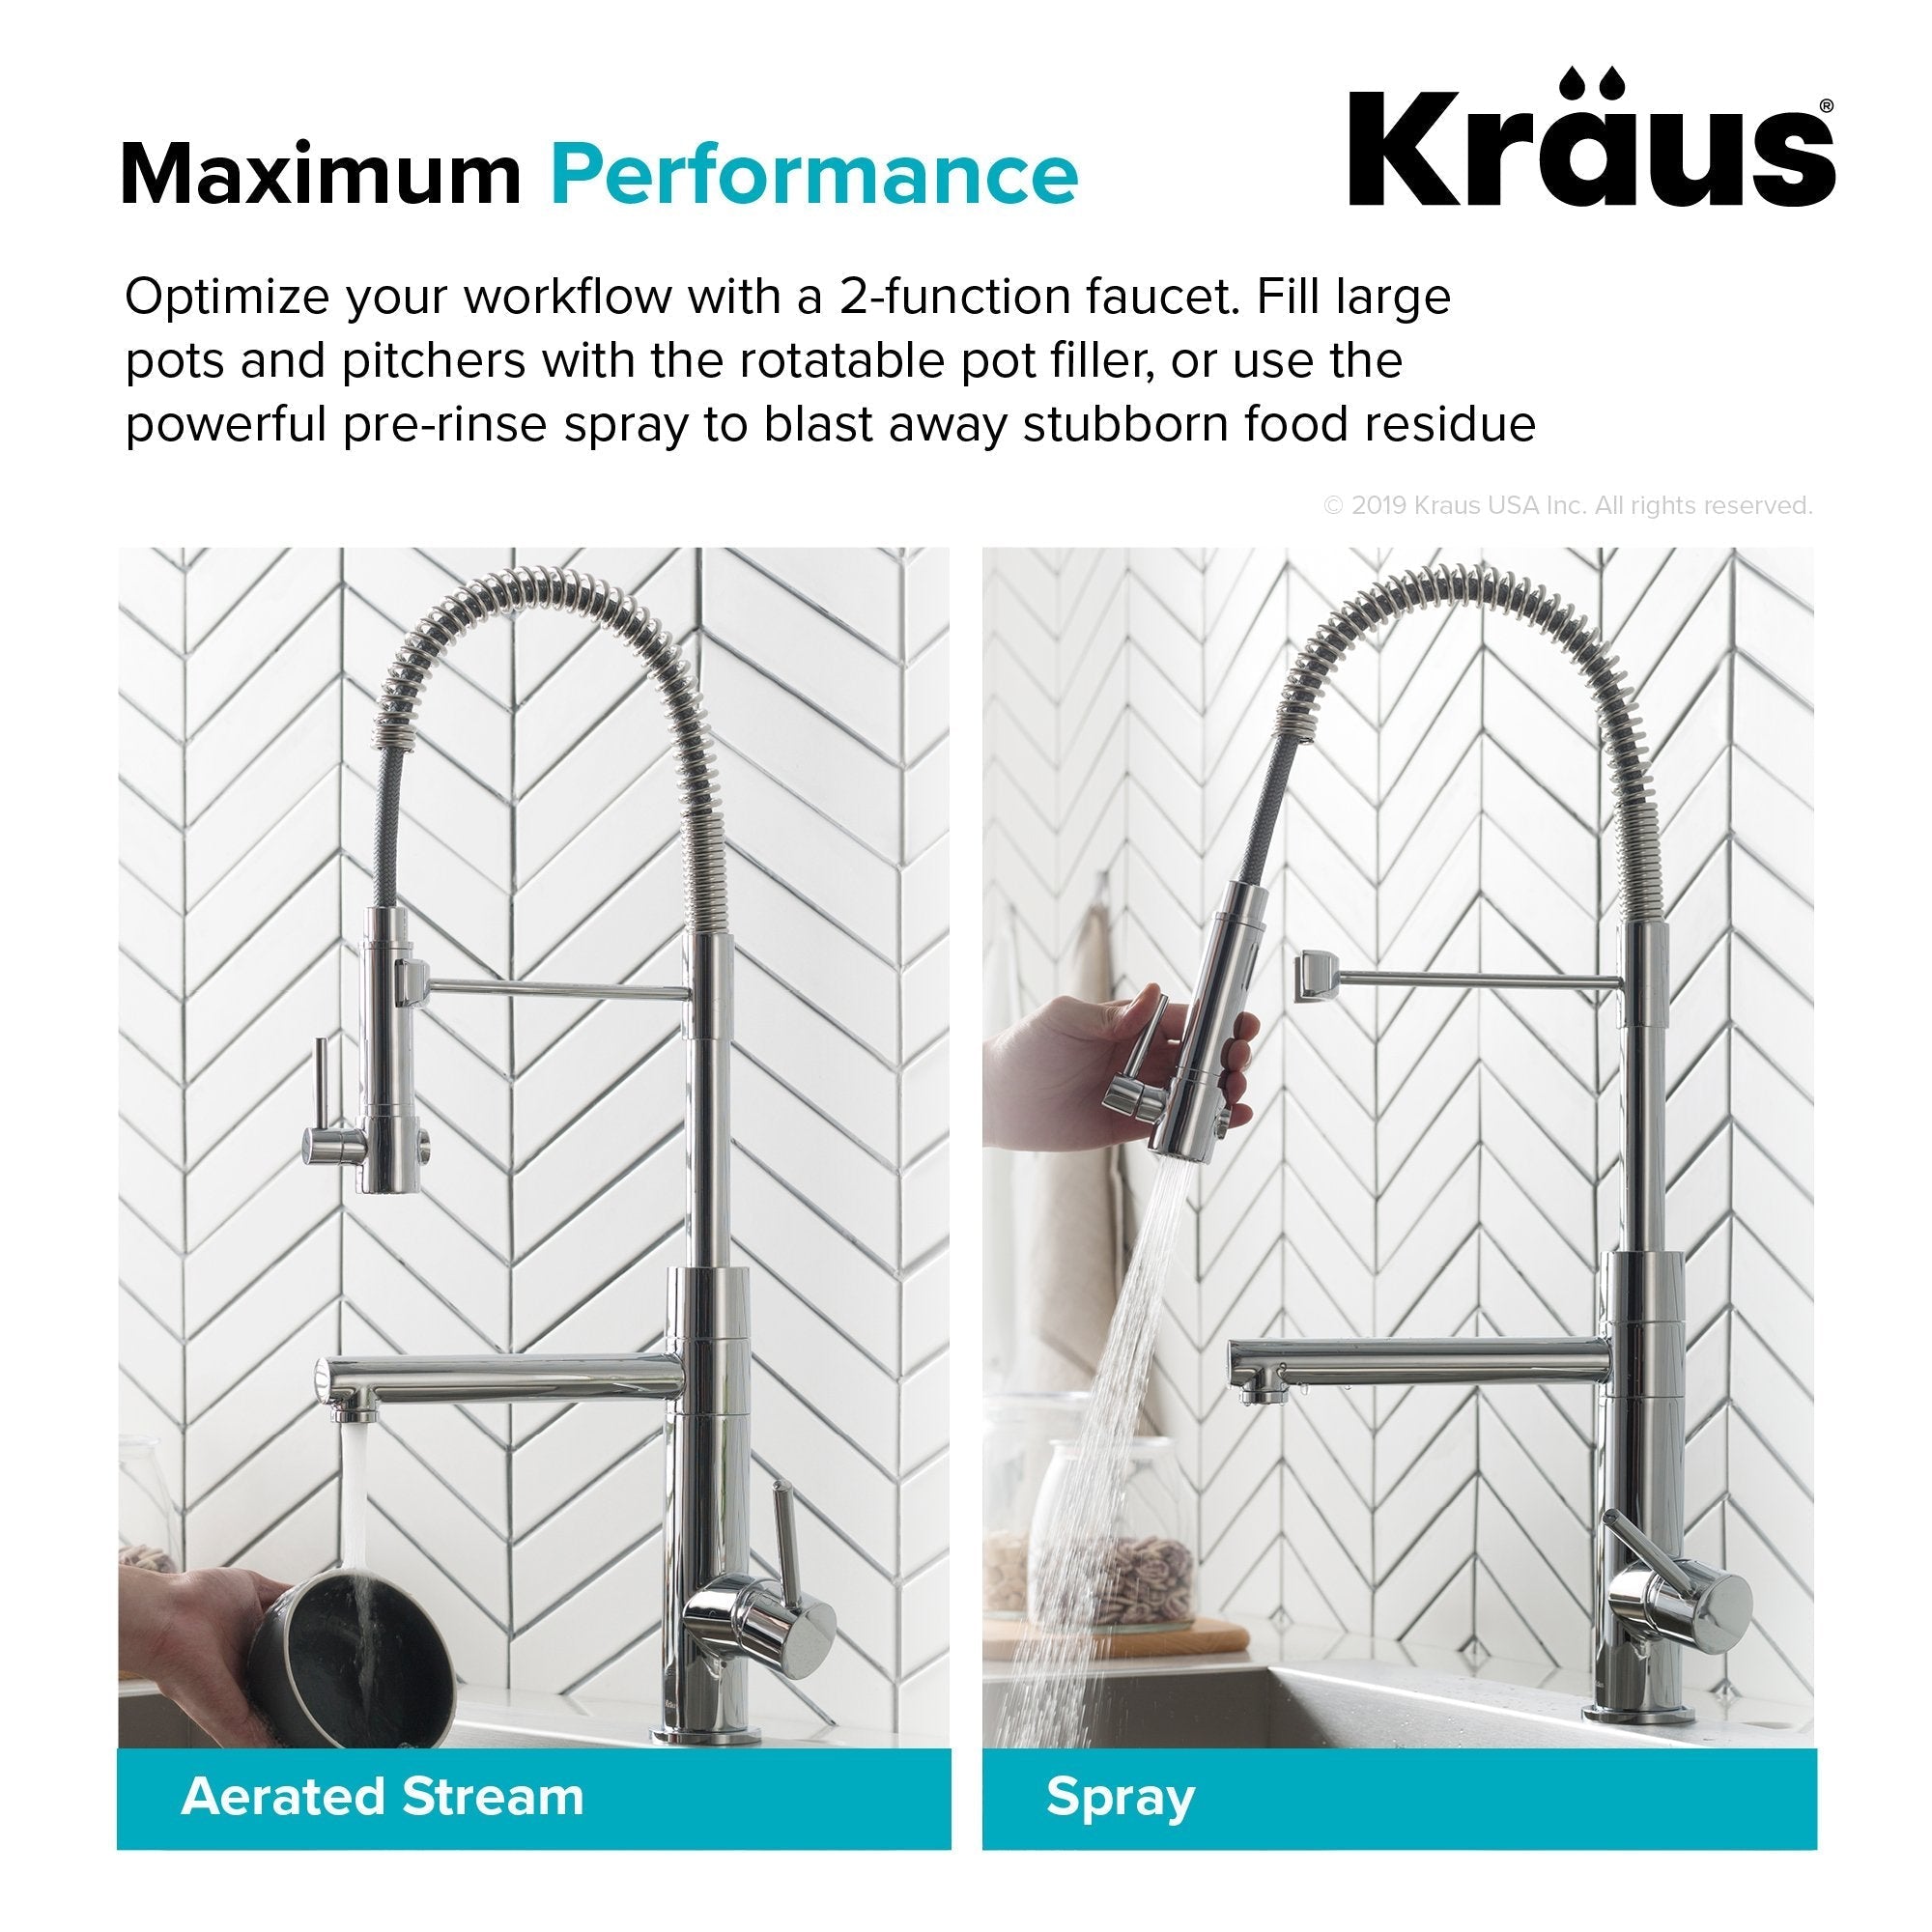 KRAUS Artec Pro 2-Function Commercial Style Pre-Rinse Kitchen Faucet in Matte Black/Black Stainless KPF-1603MBSB | DirectSinks